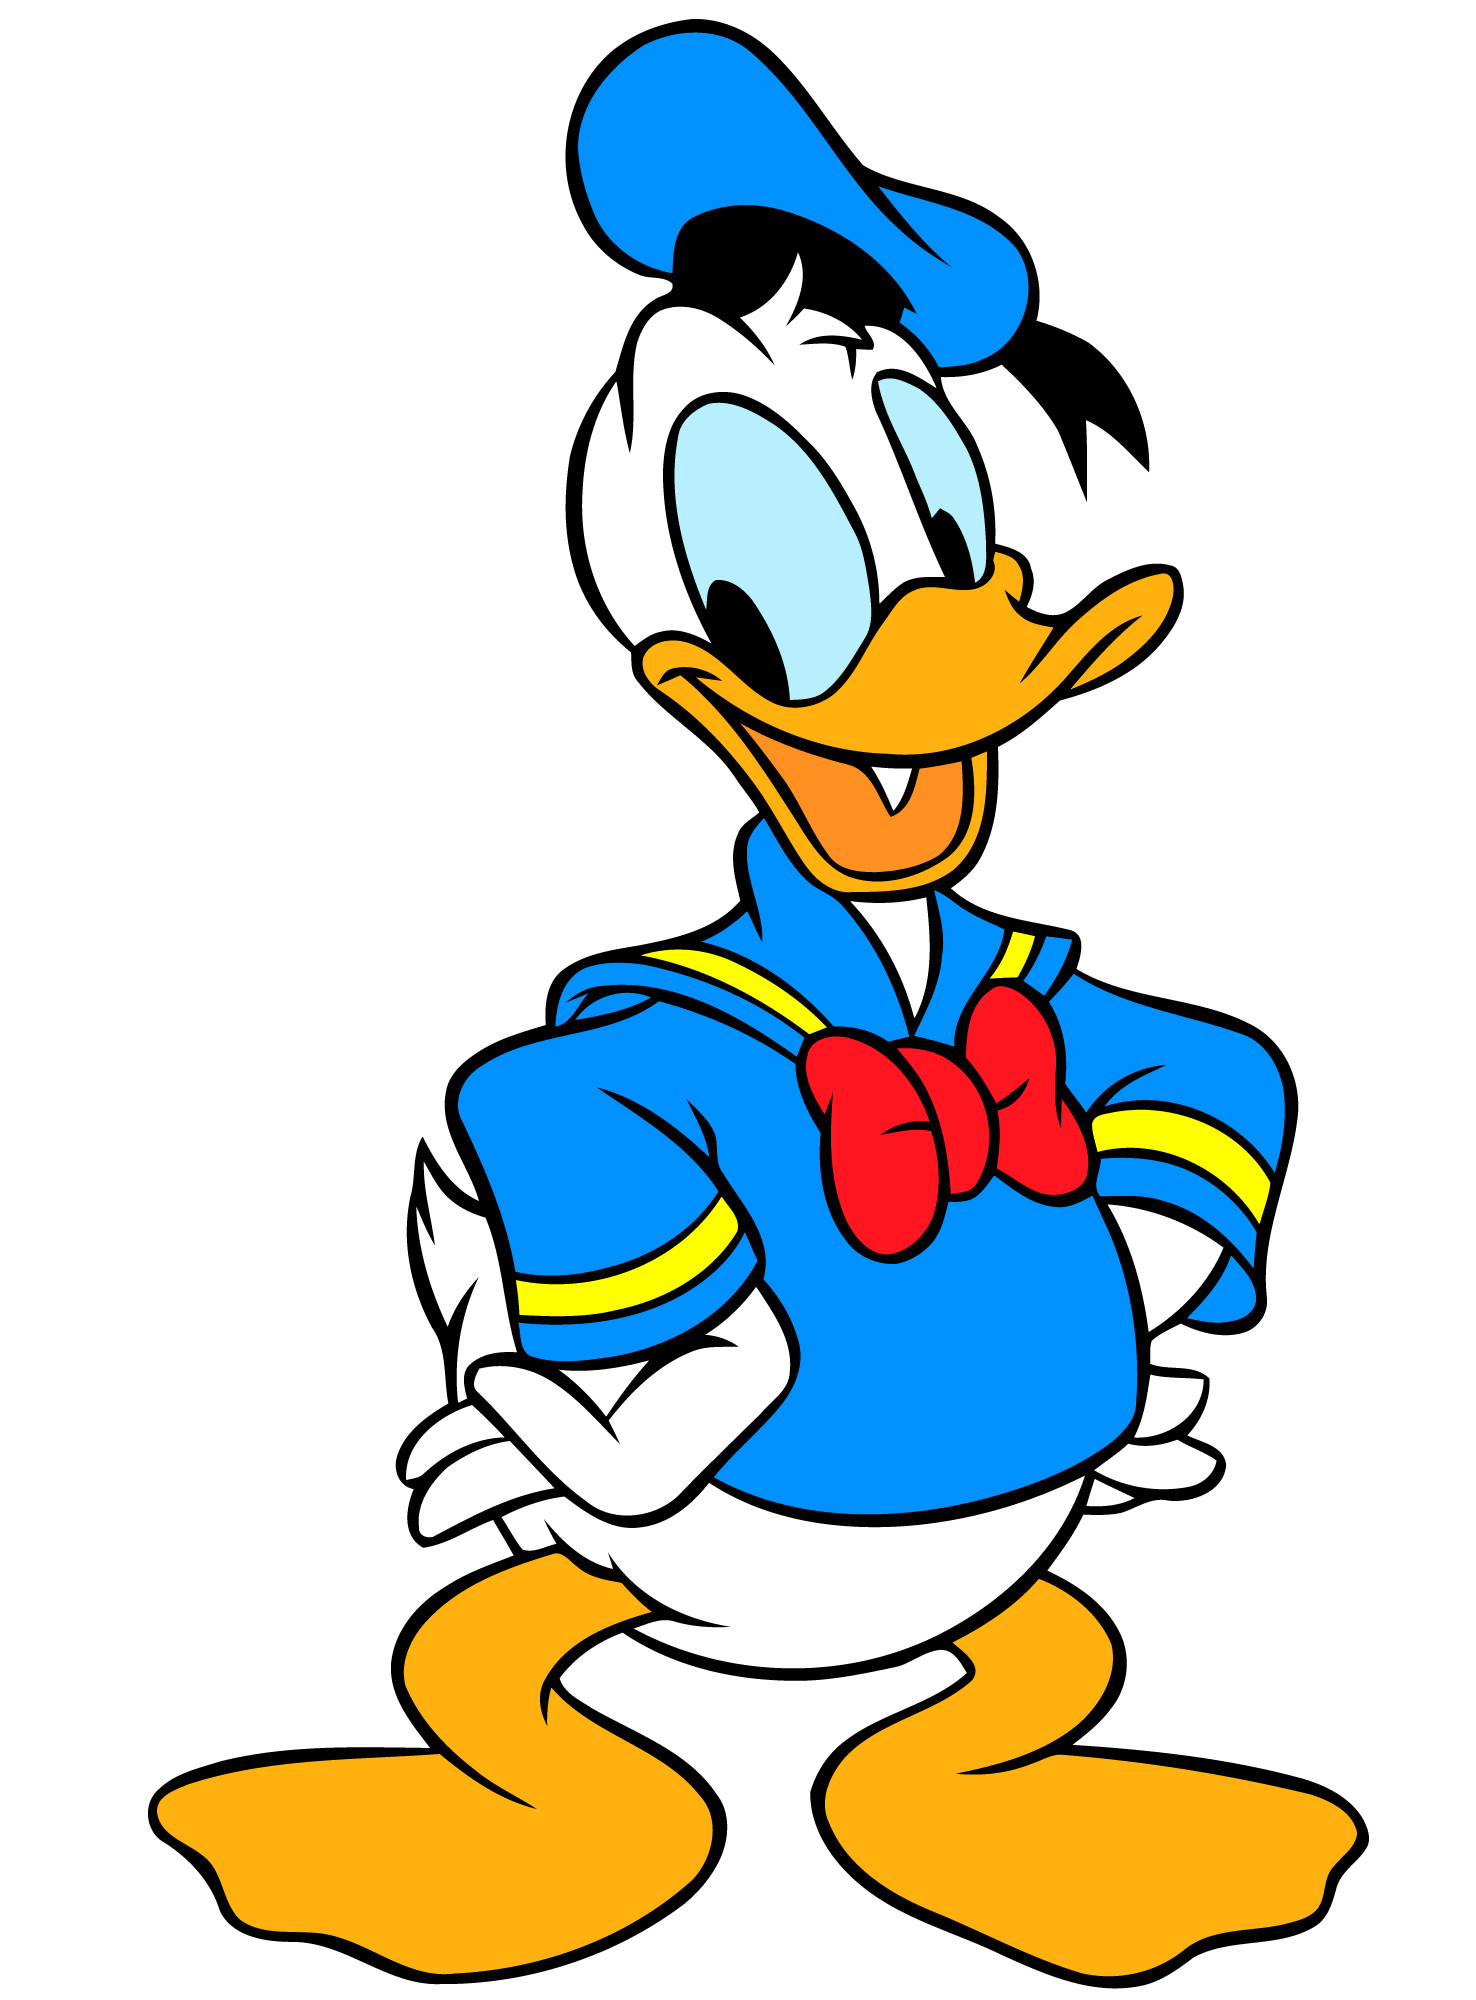 Fhdq Donald Duck Wallpapers, High Quality, Qg - Donald Duck In Color - HD Wallpaper 